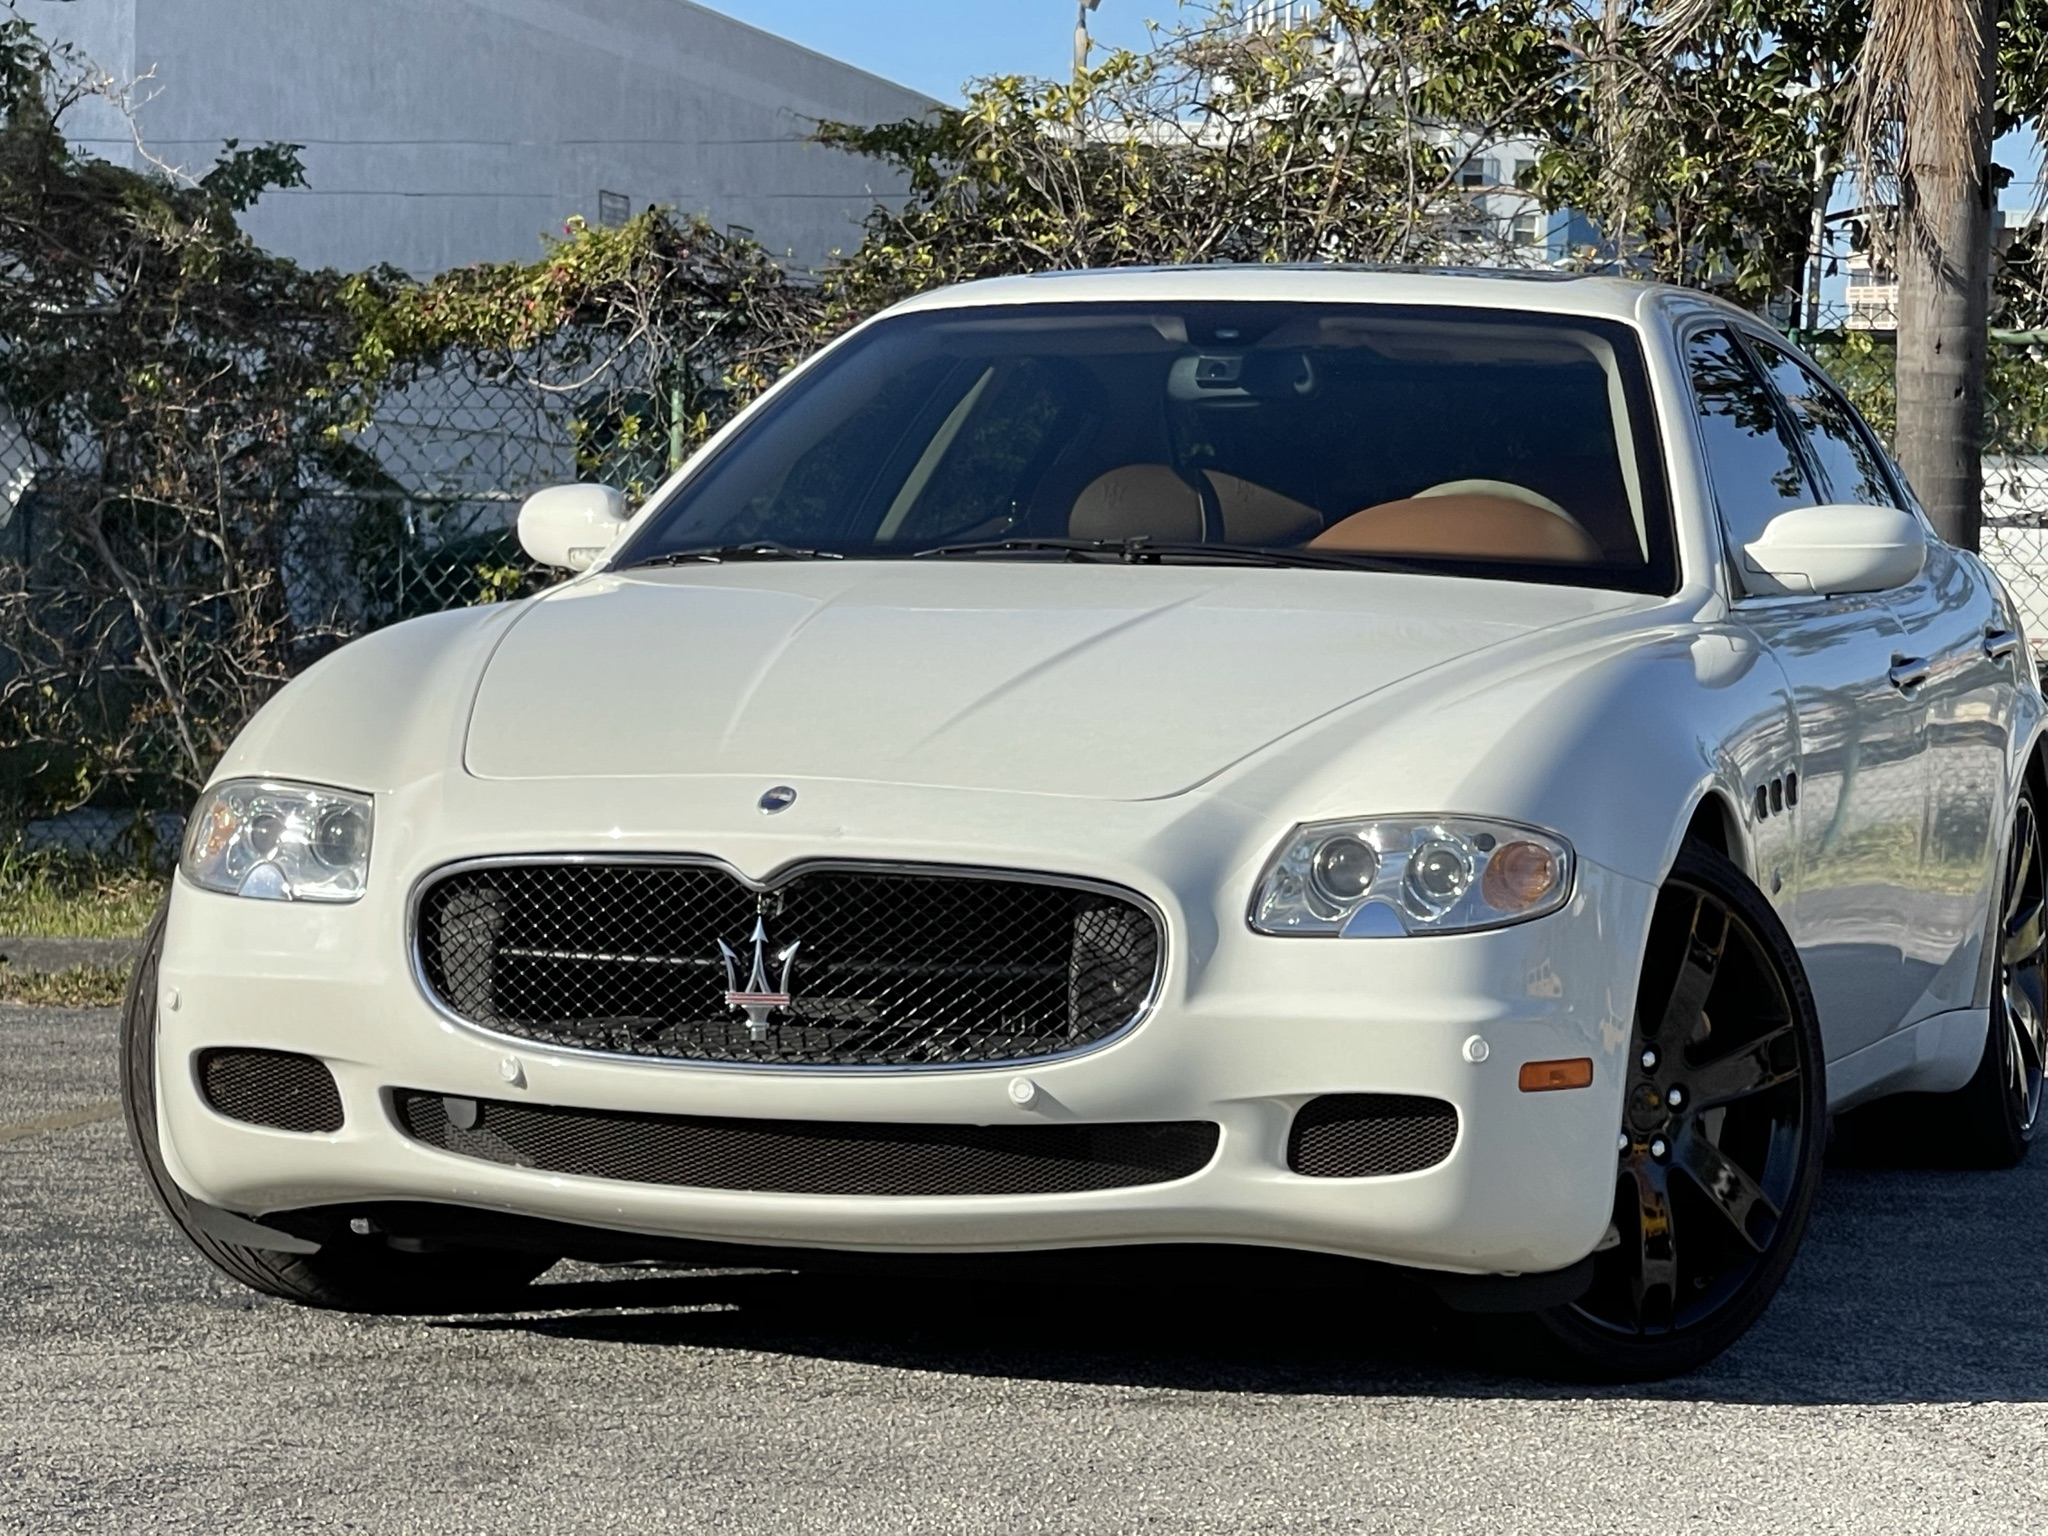 Buy Used 2008 MASERATI QUATTROPORTE GTS for $22 900 from trusted dealer in  Brooklyn, NY!